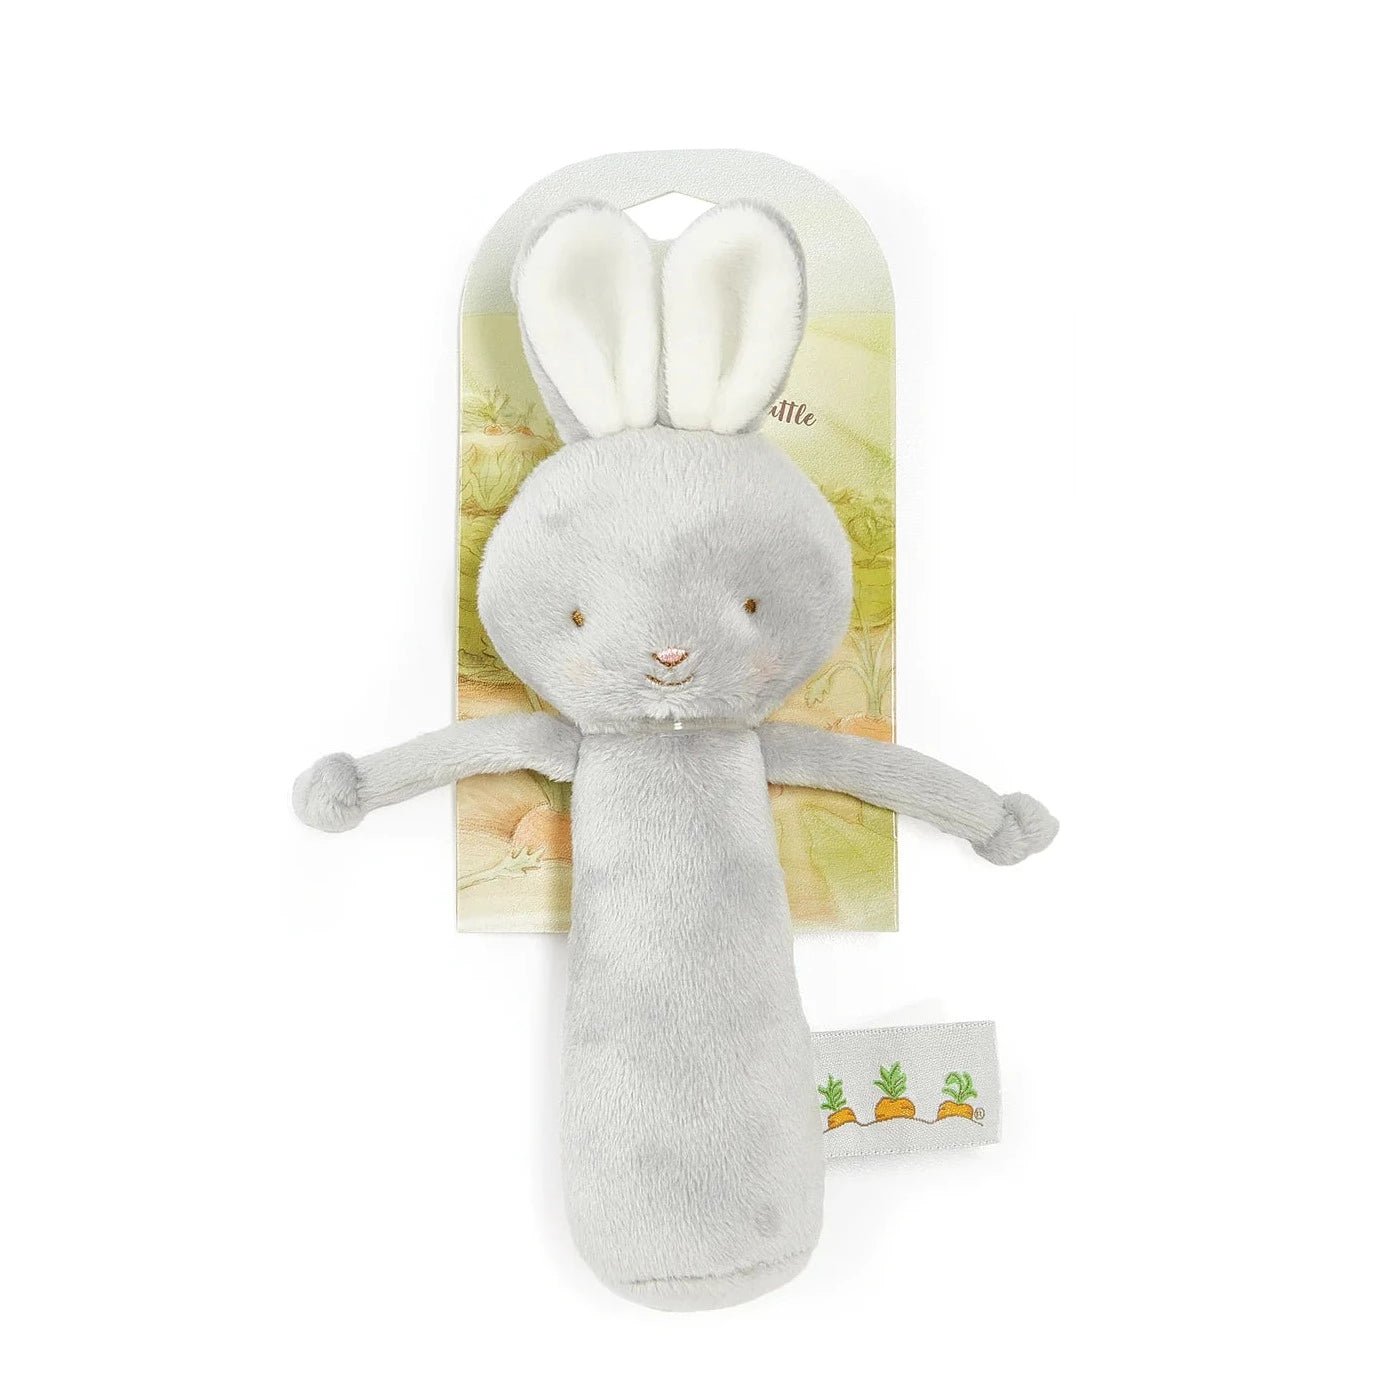 Friendly Chime Baby Rattle - Gray Bunny